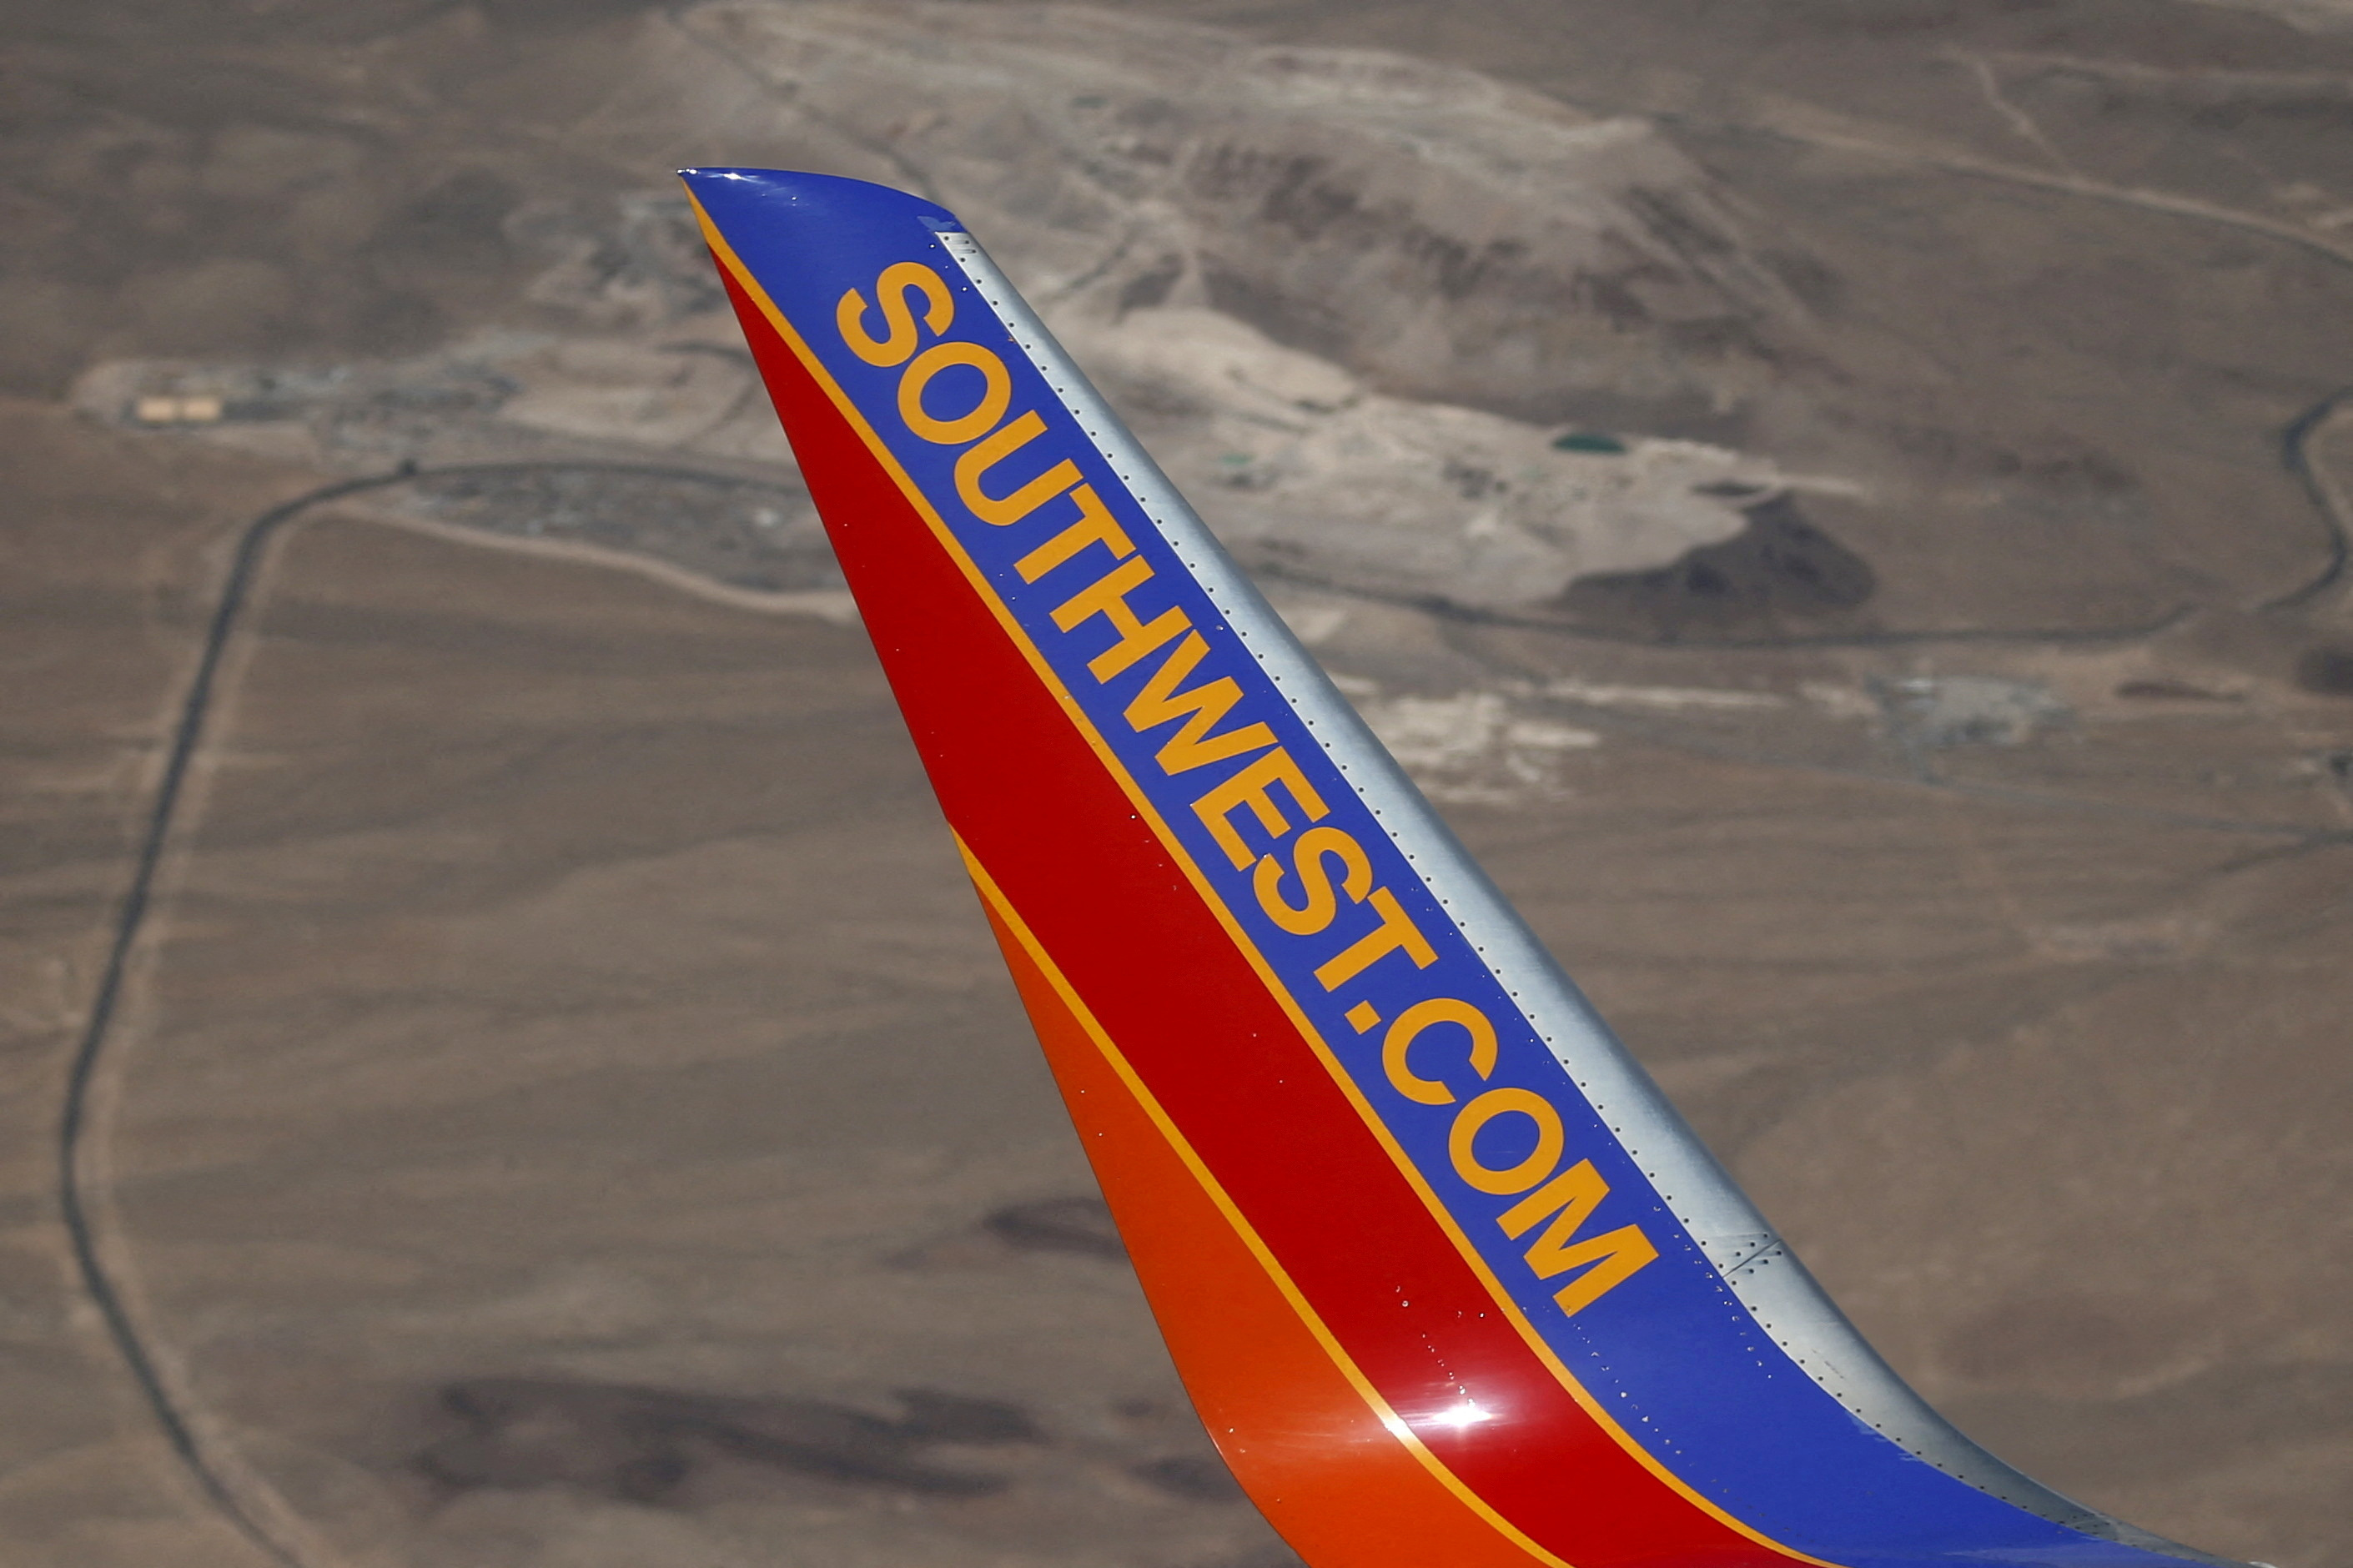 A Southwest Airlines plane flies over Nevada